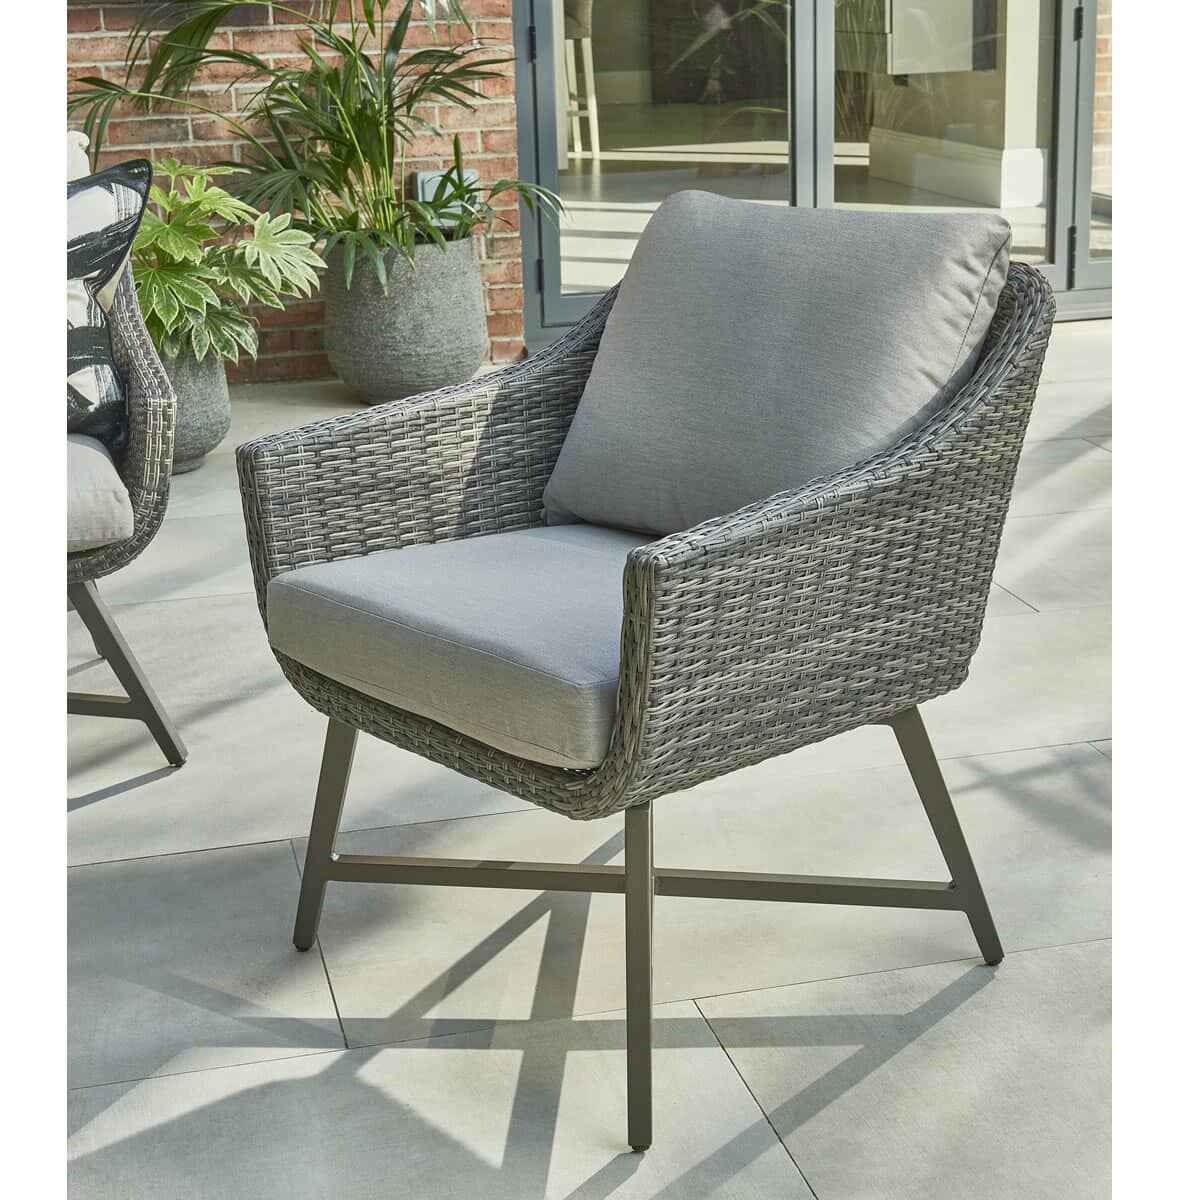 Kettler LaMode Lounge Armchair Pair with Cushions